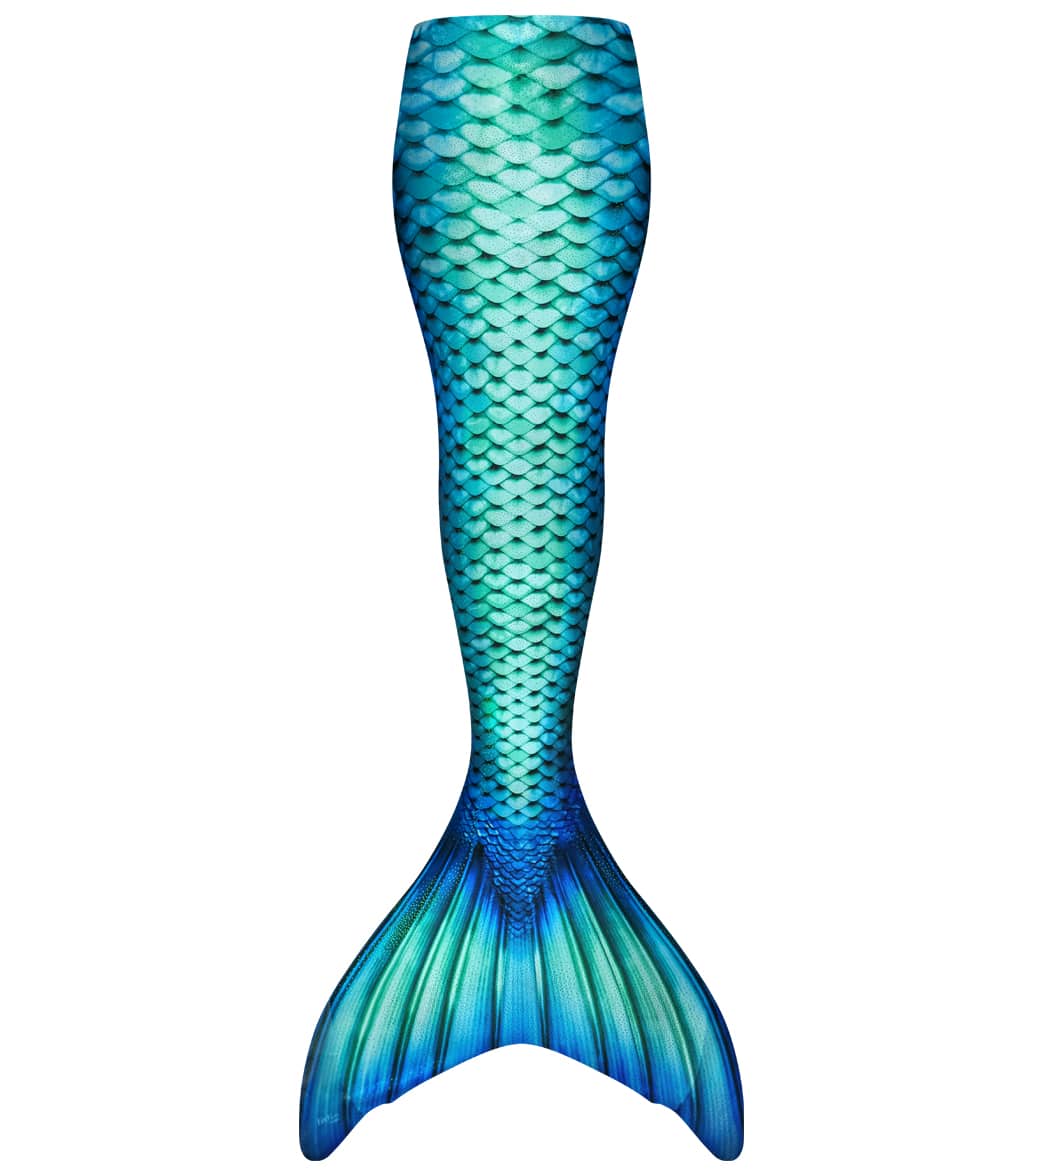 Fin Fun Aquamarine Mermaid Tail & Monofin Youth/Adult - Youth Large 10 - Swimoutlet.com